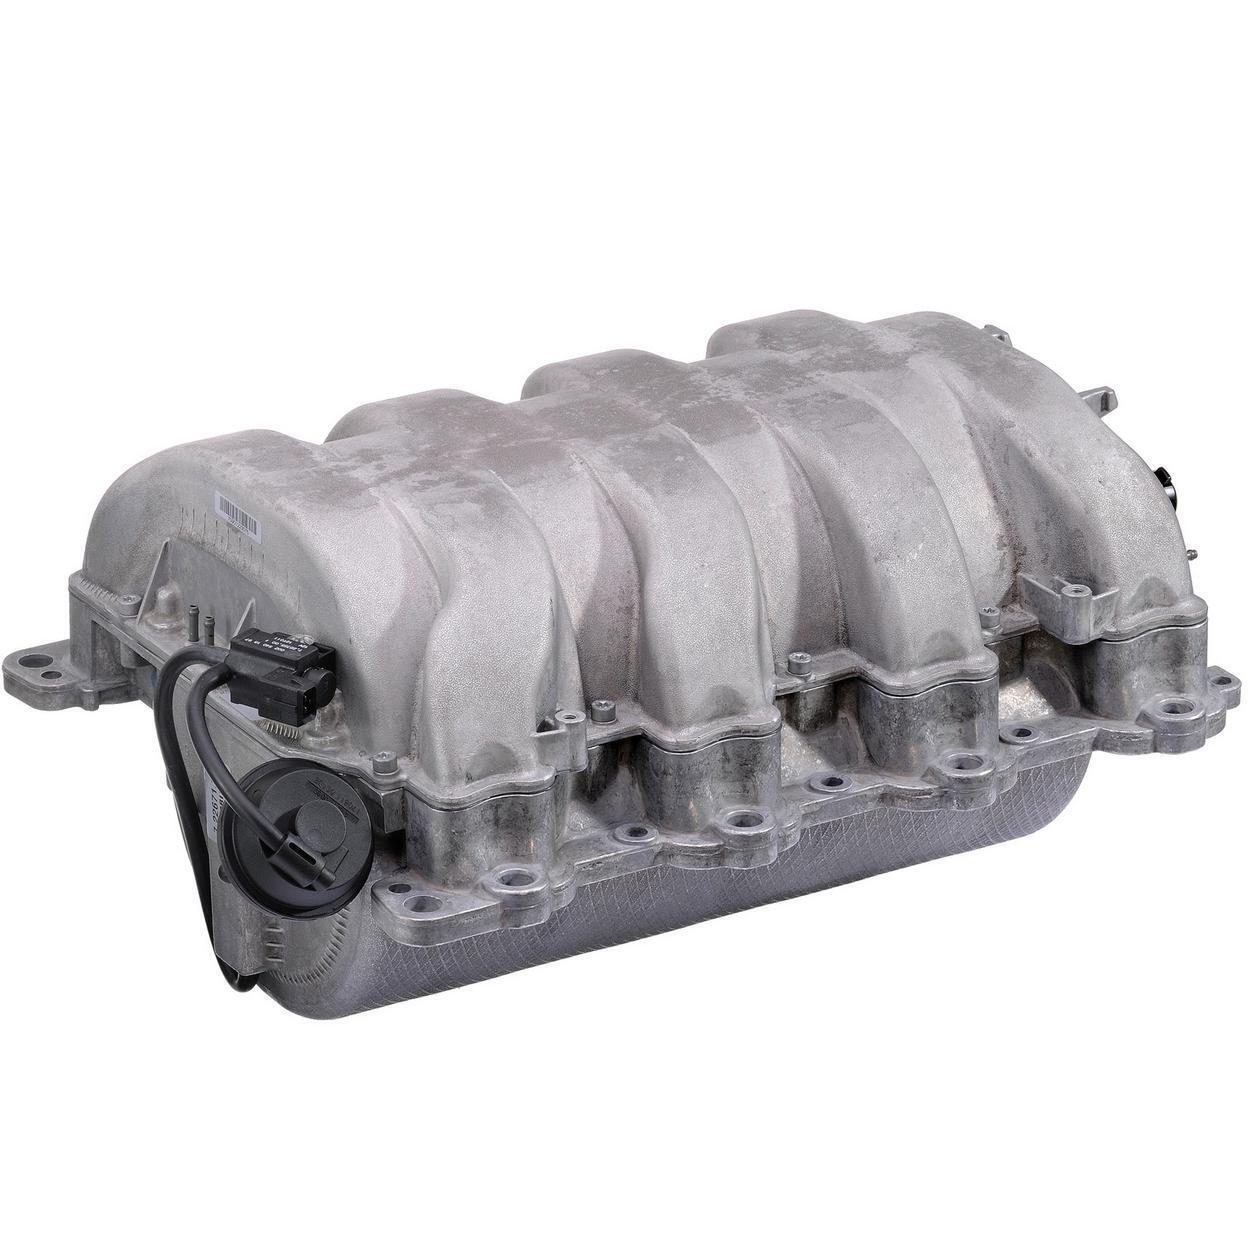 Engine Intake Manifold for 2006 Mercedes CLS500